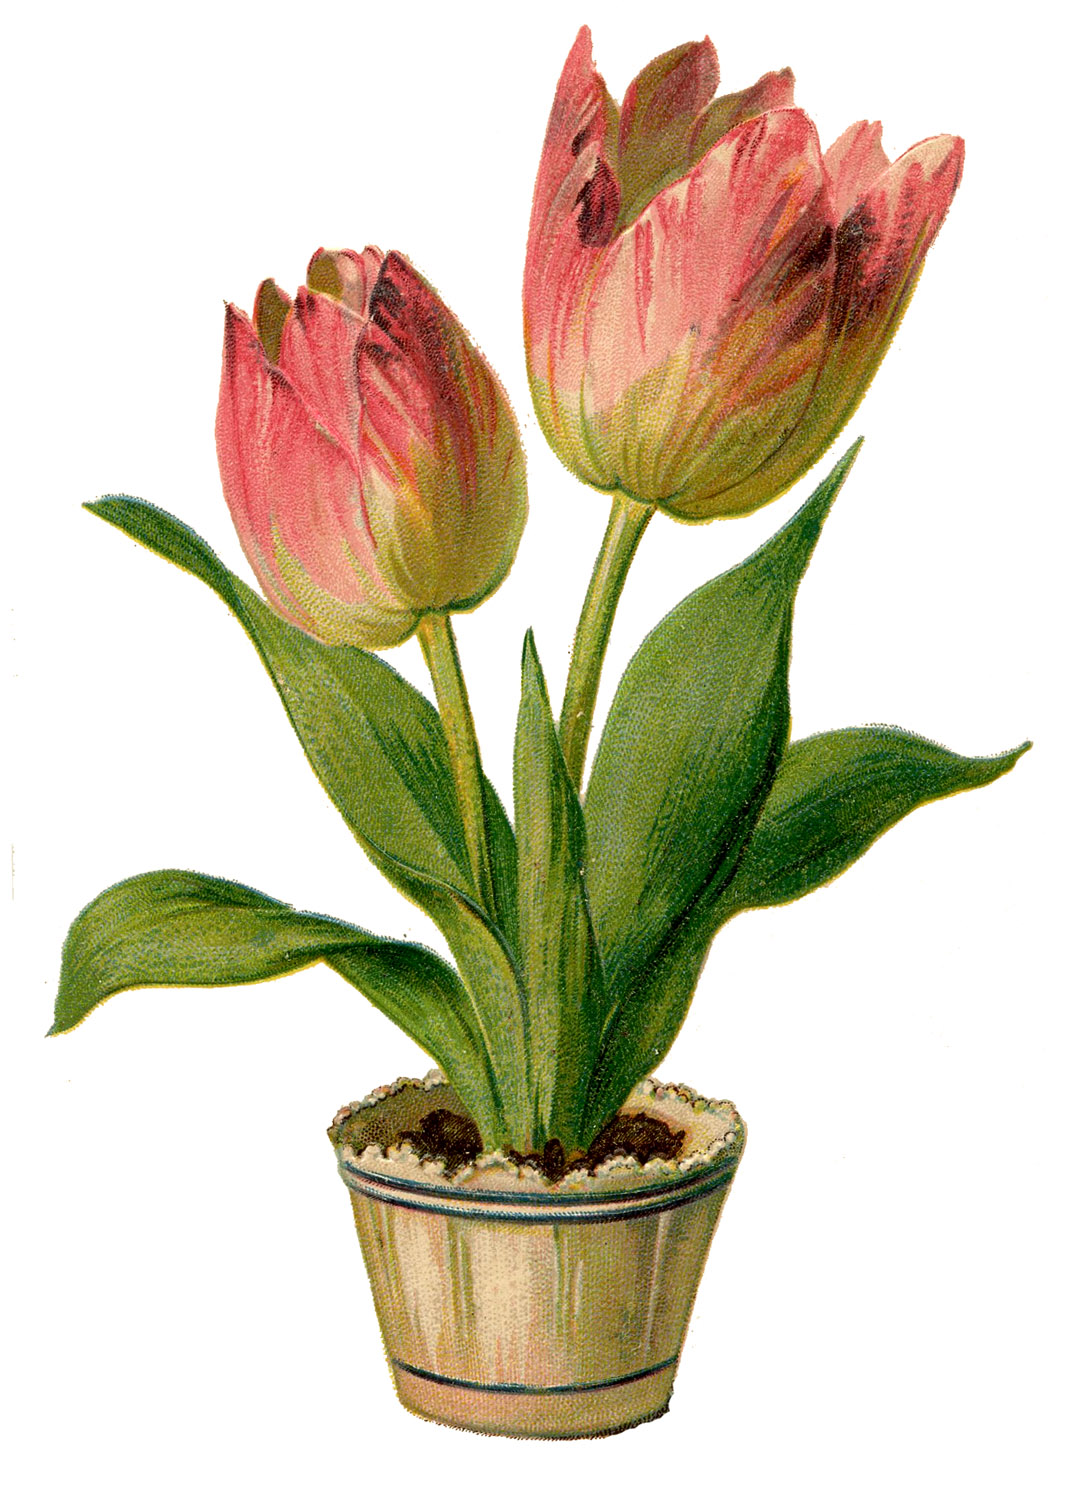 Vintage Clip Art   Pretty Pink Tulips   The Graphics Fairy